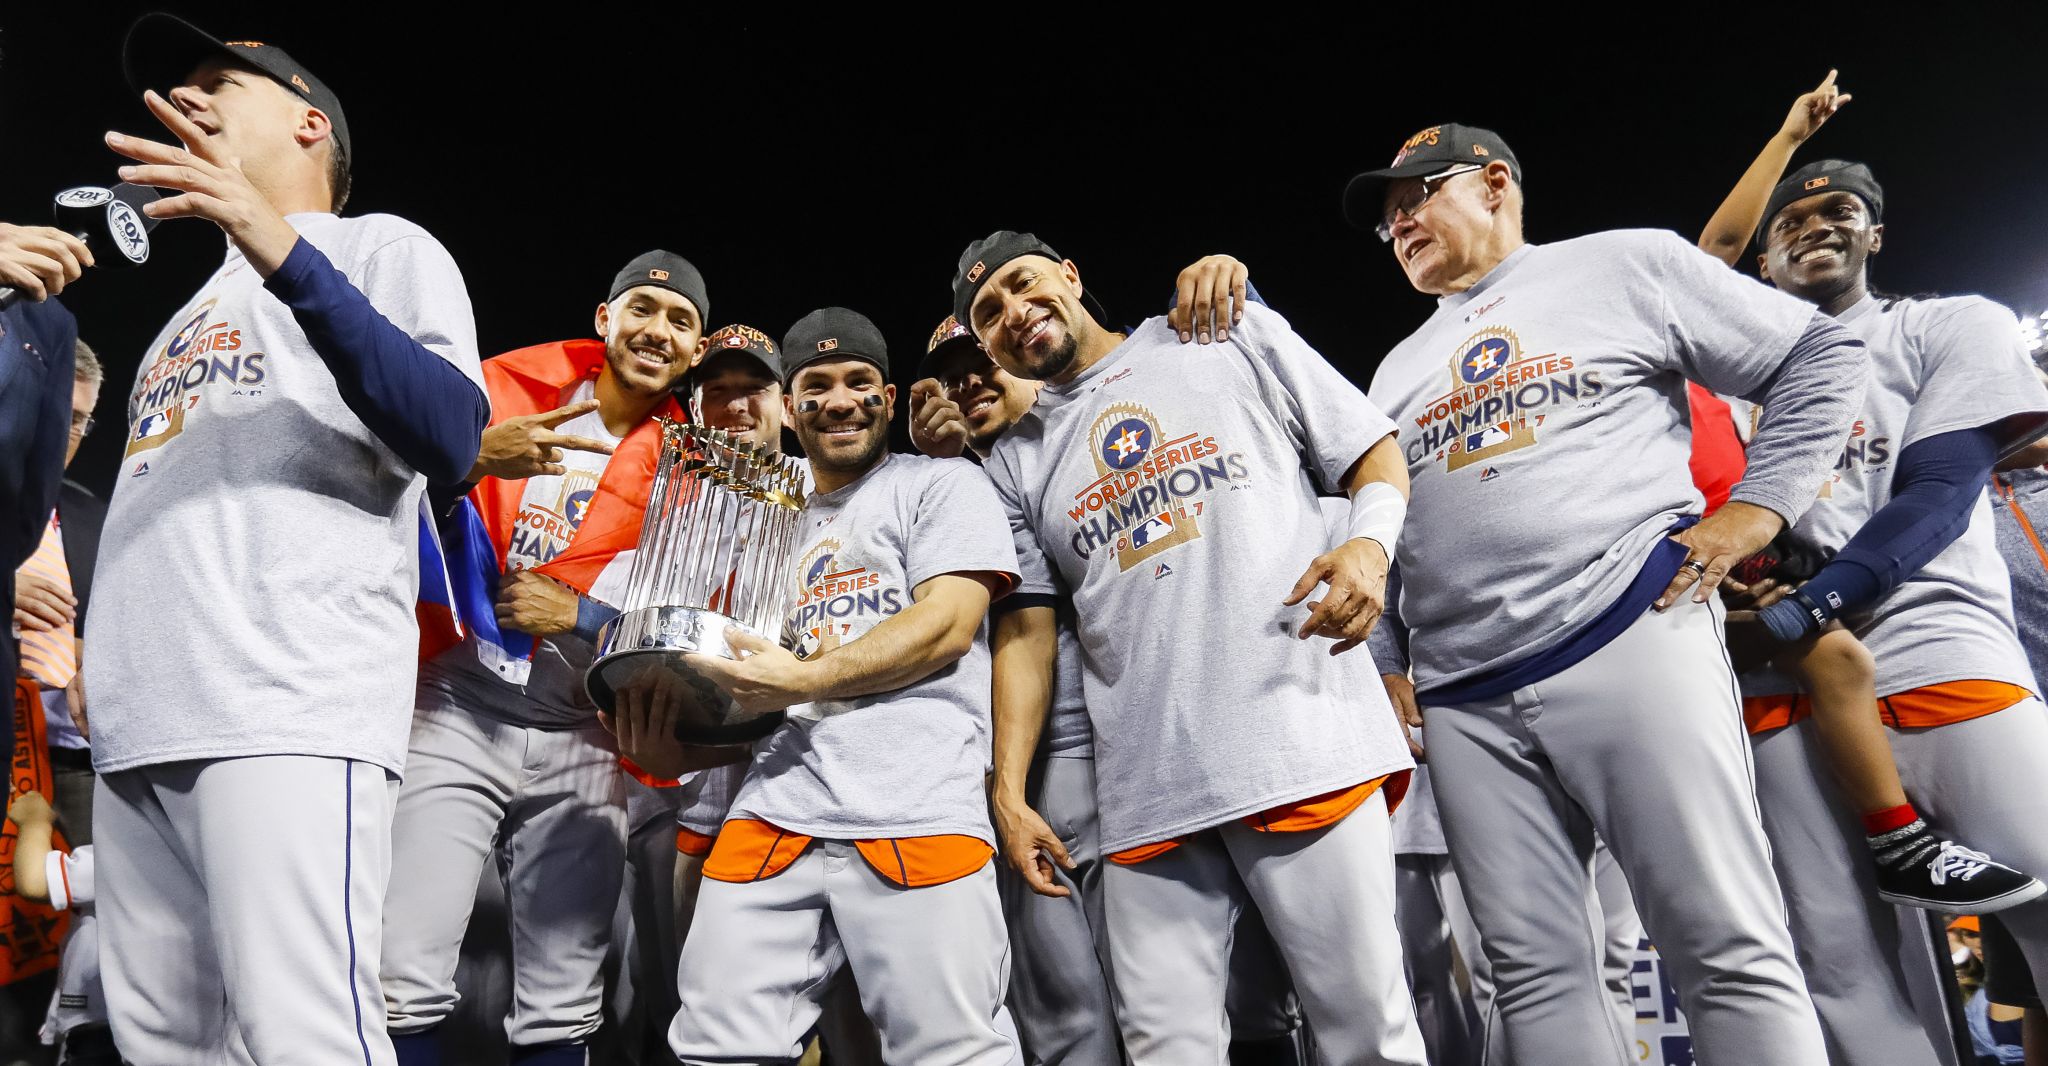 Top of the World: From modest beginnings, Astros rose to champions